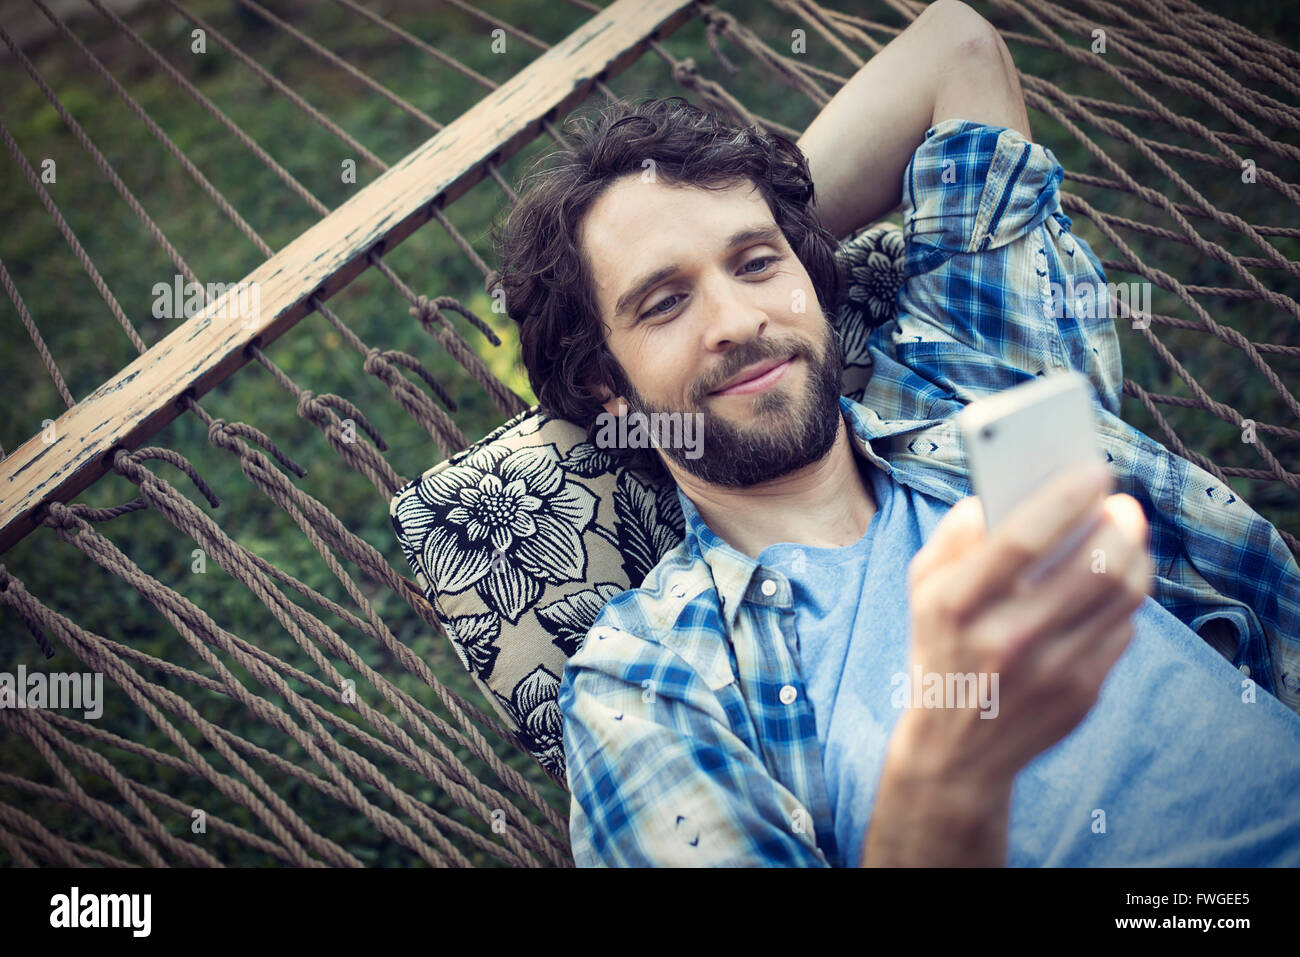 A man lying in a garden hammock taking selfies with his phone. Stock Photo